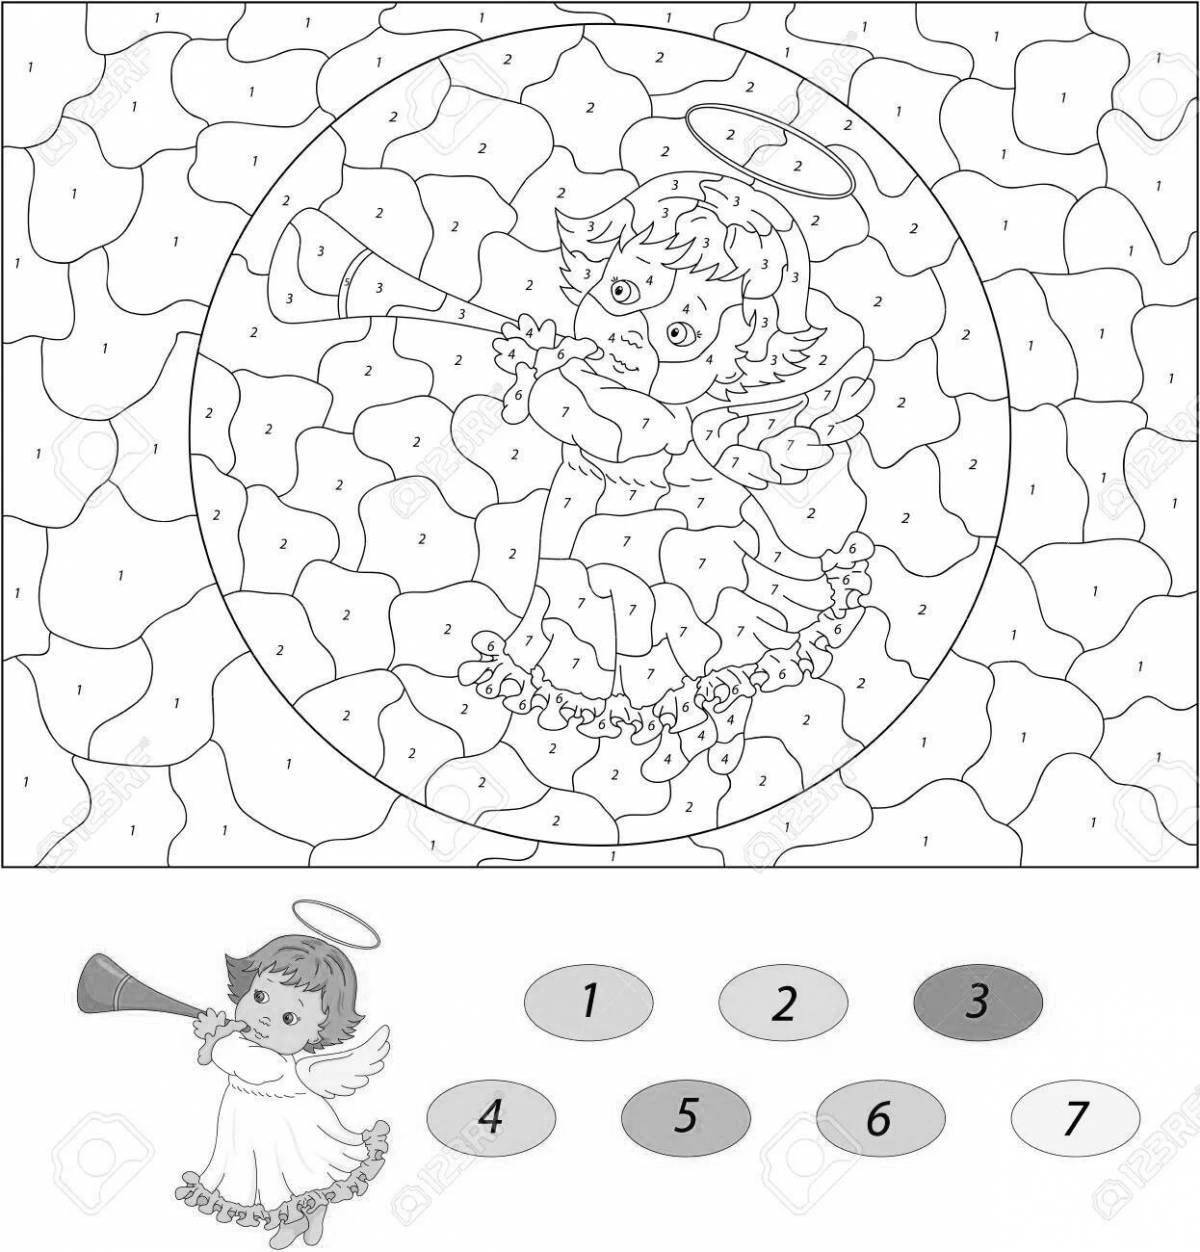 Charming angel coloring by numbers